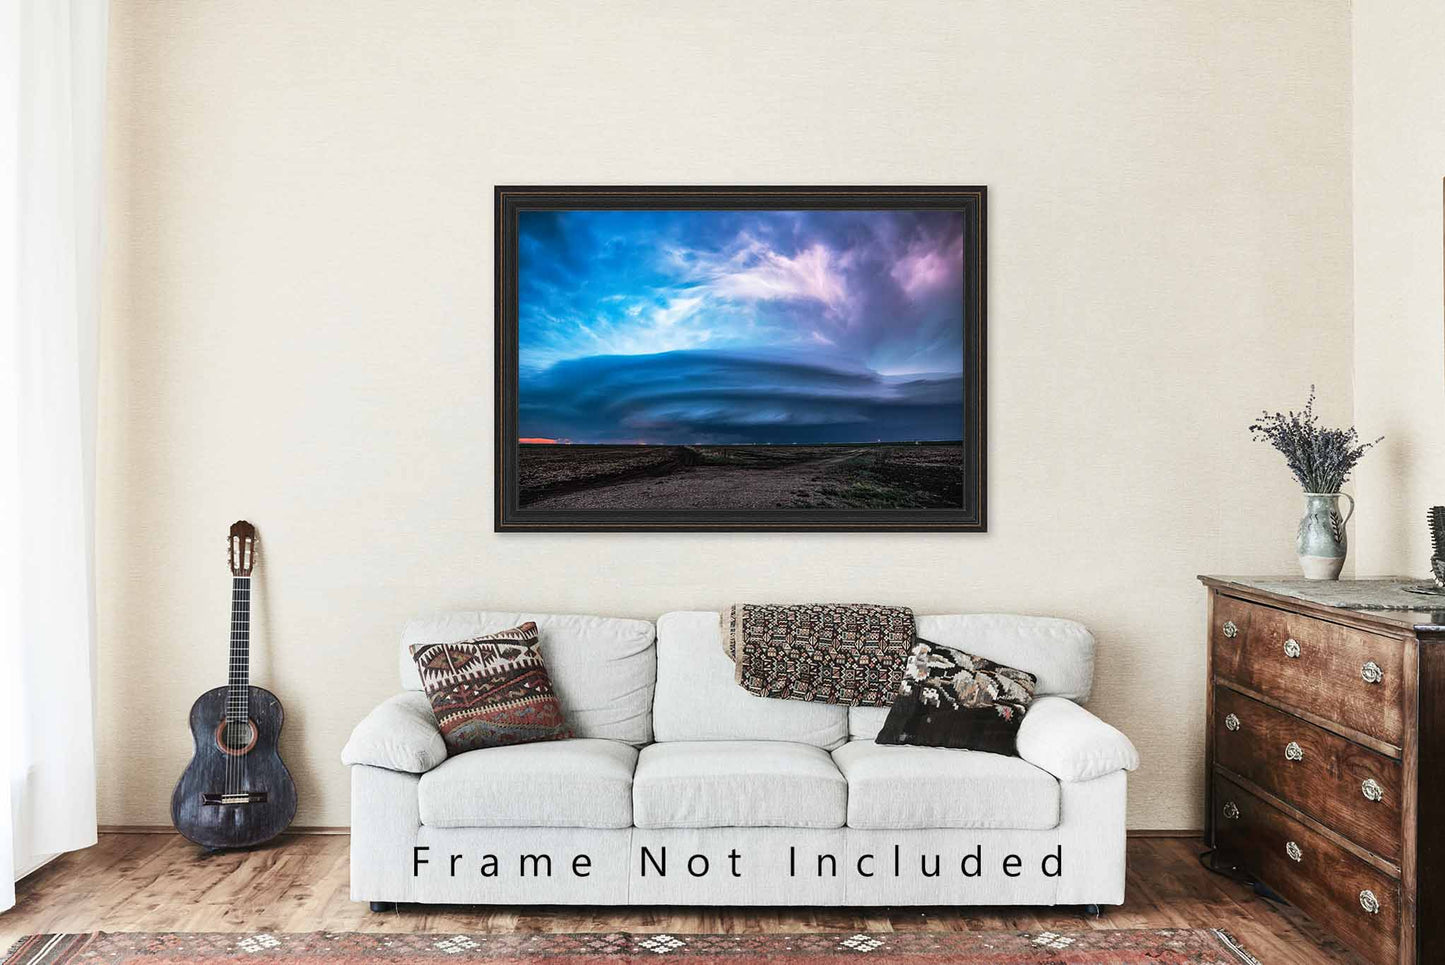 Storm Wall Art Photography Print - Picture of Supercell Thundestorm Illuminated by Lightning at Night in Kansas Weather Photo Artwork Decor